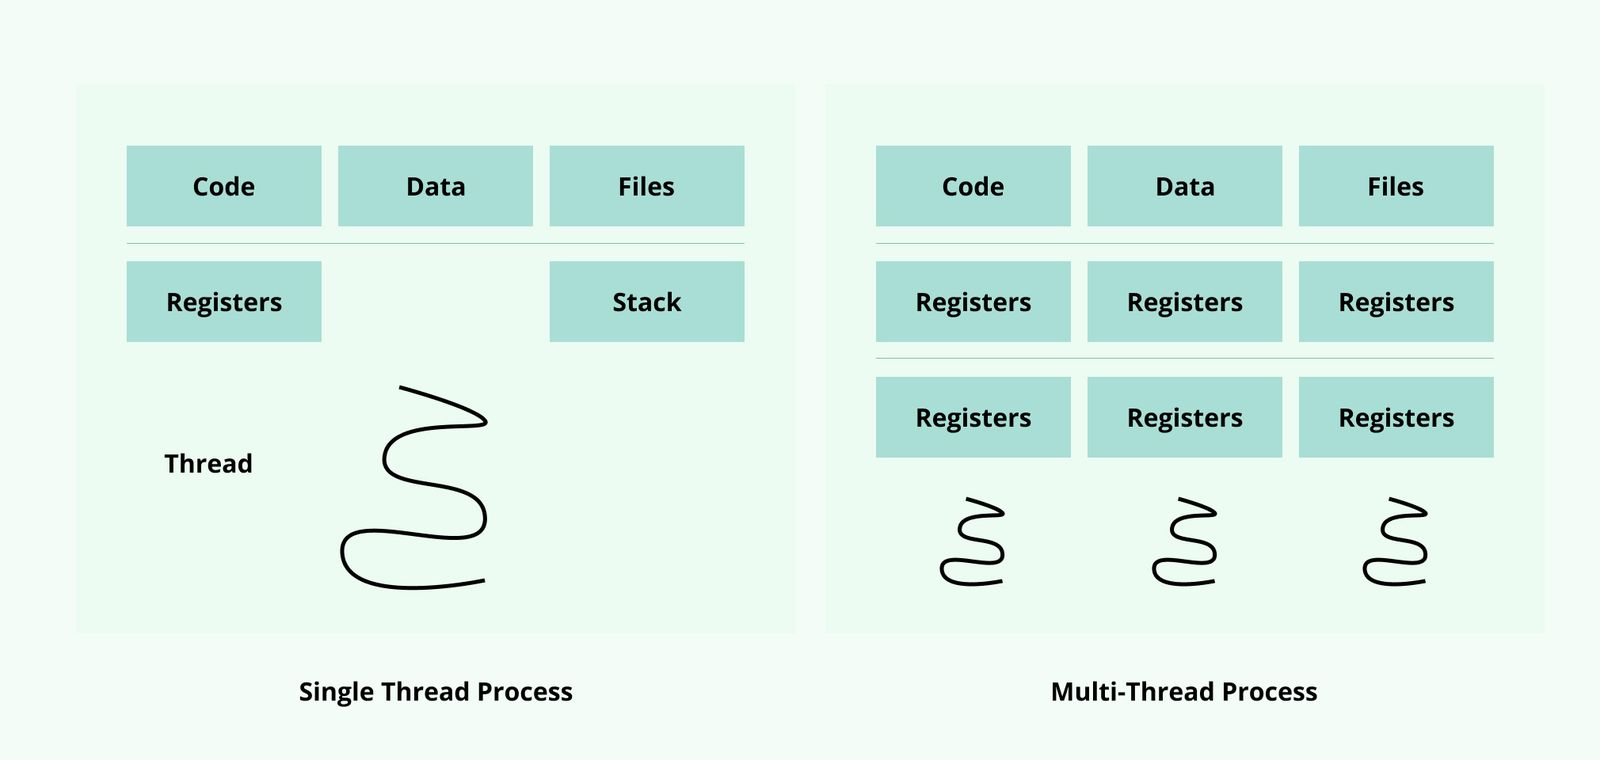 Overview of processes and threads: single thread process has one thread aimed at all boxes: code, data, files, registers, stacks. Multi thread process has three different threads aimed at stacks of boxes: code, registers, register; data, registers, registers; files, registers, registers